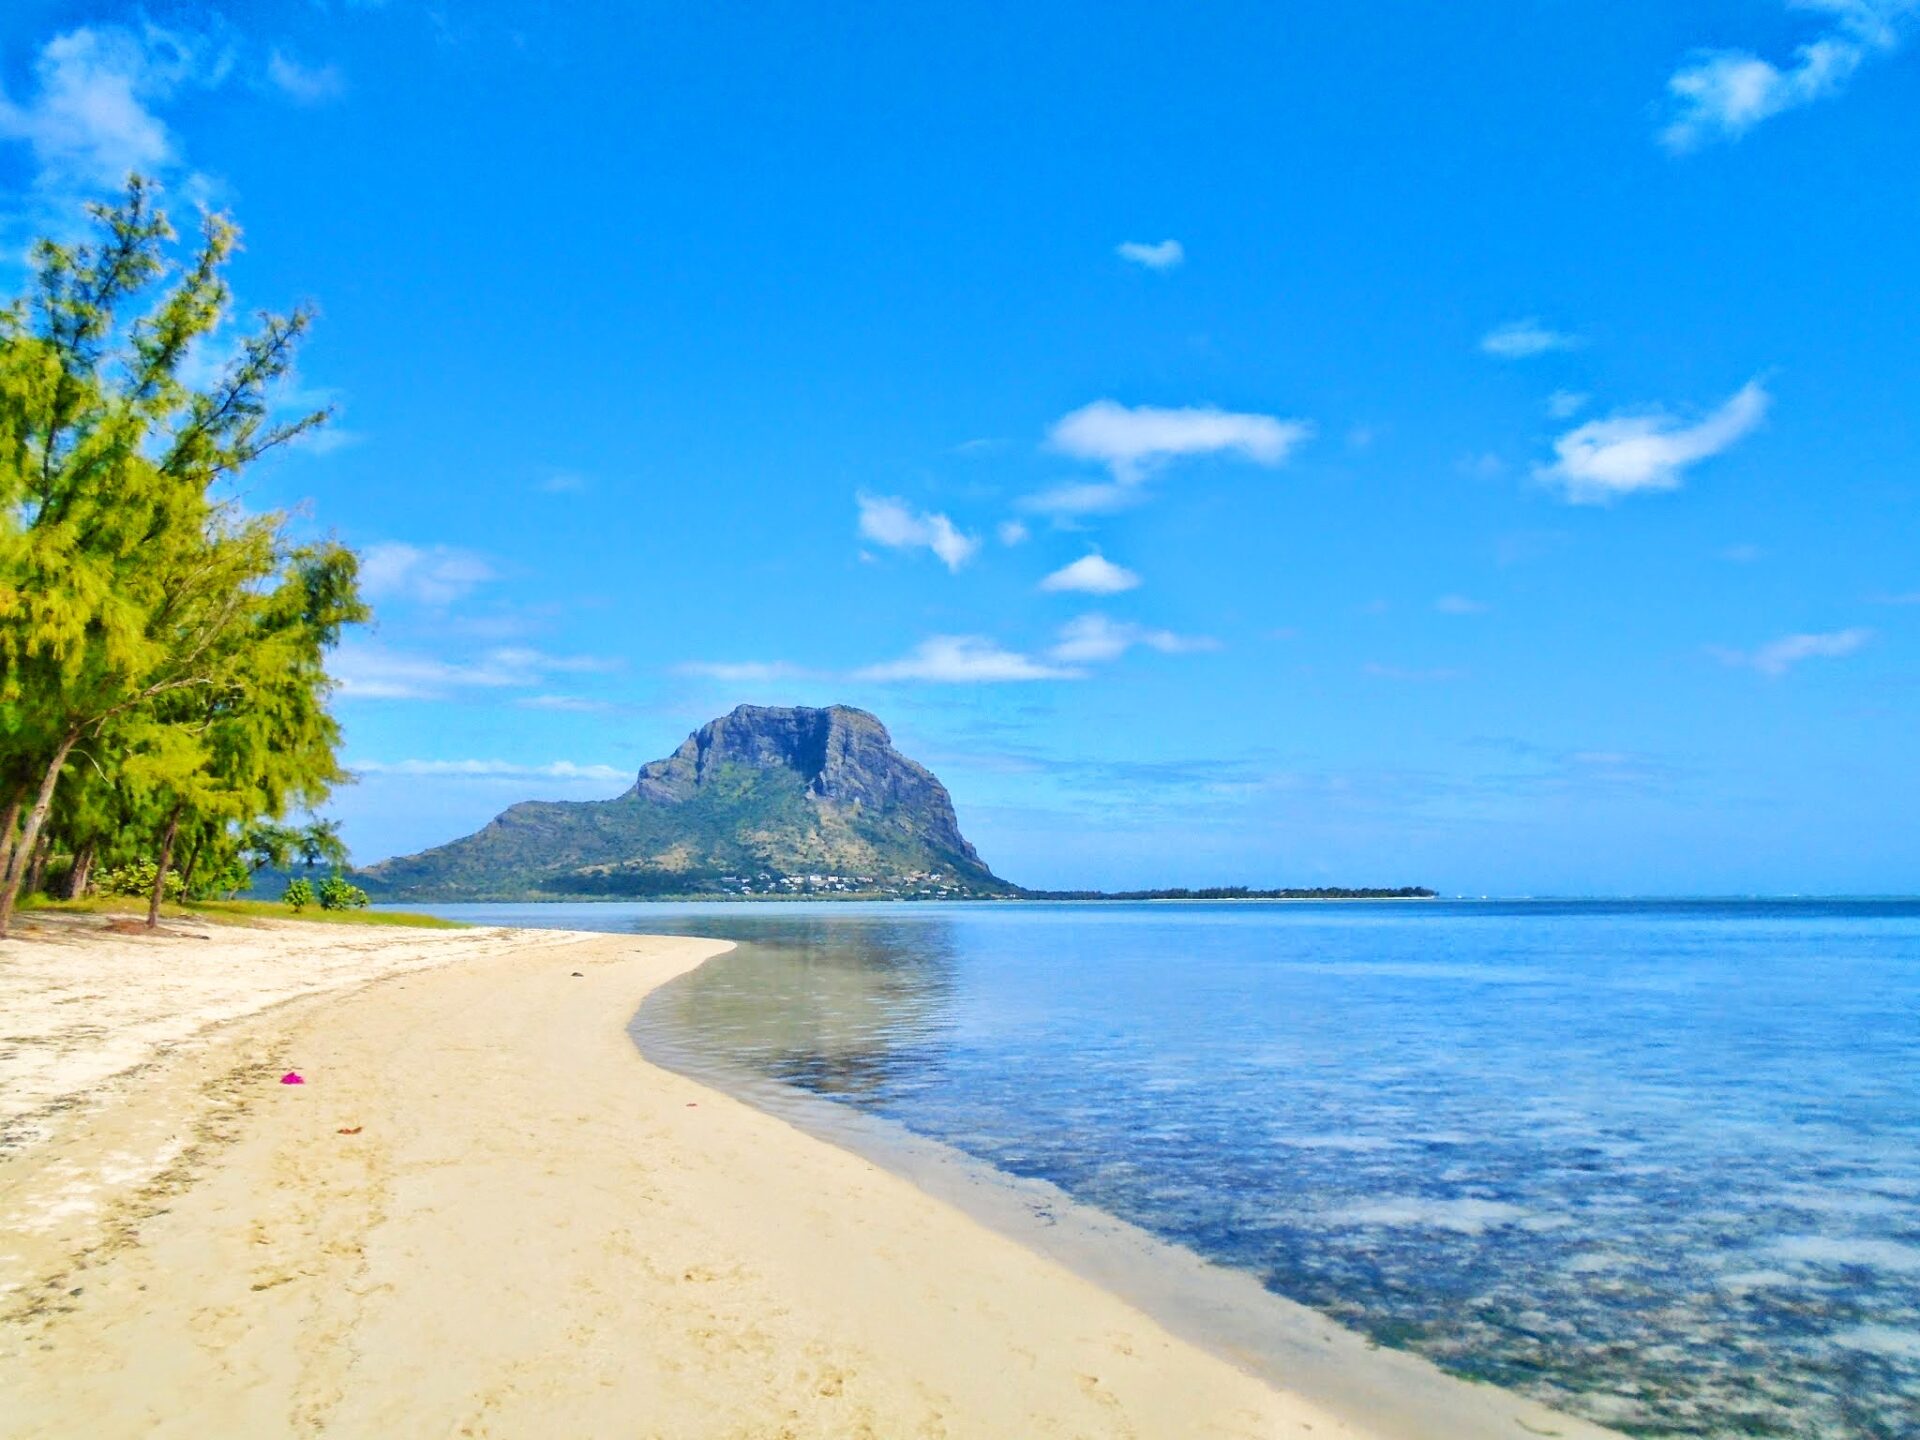 Le Morne Mountain, viewed from Ile aux Bénitiers